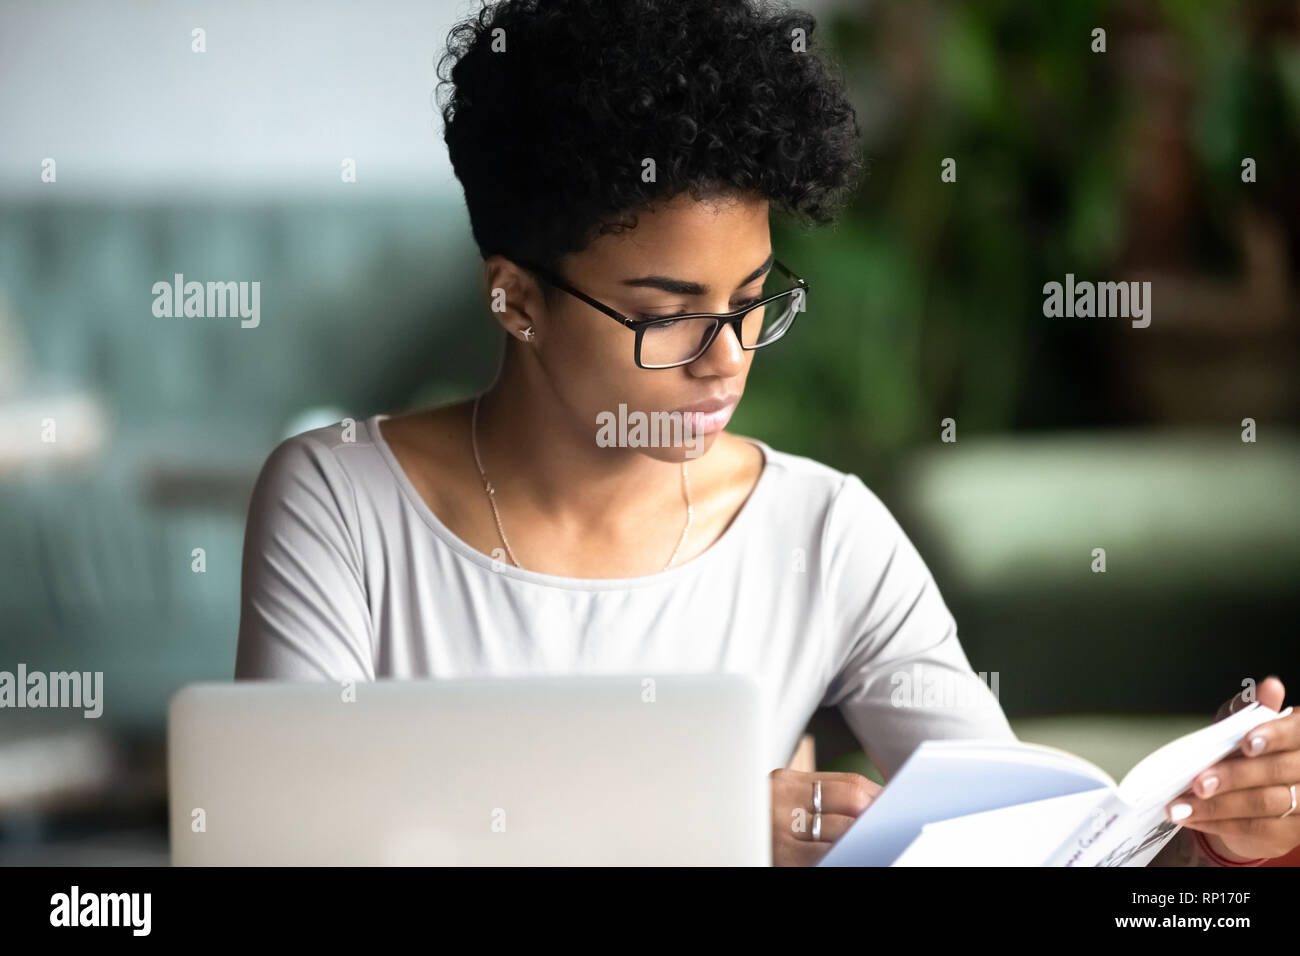 Concentrated african beautiful woman studying reading a book Stock Photo